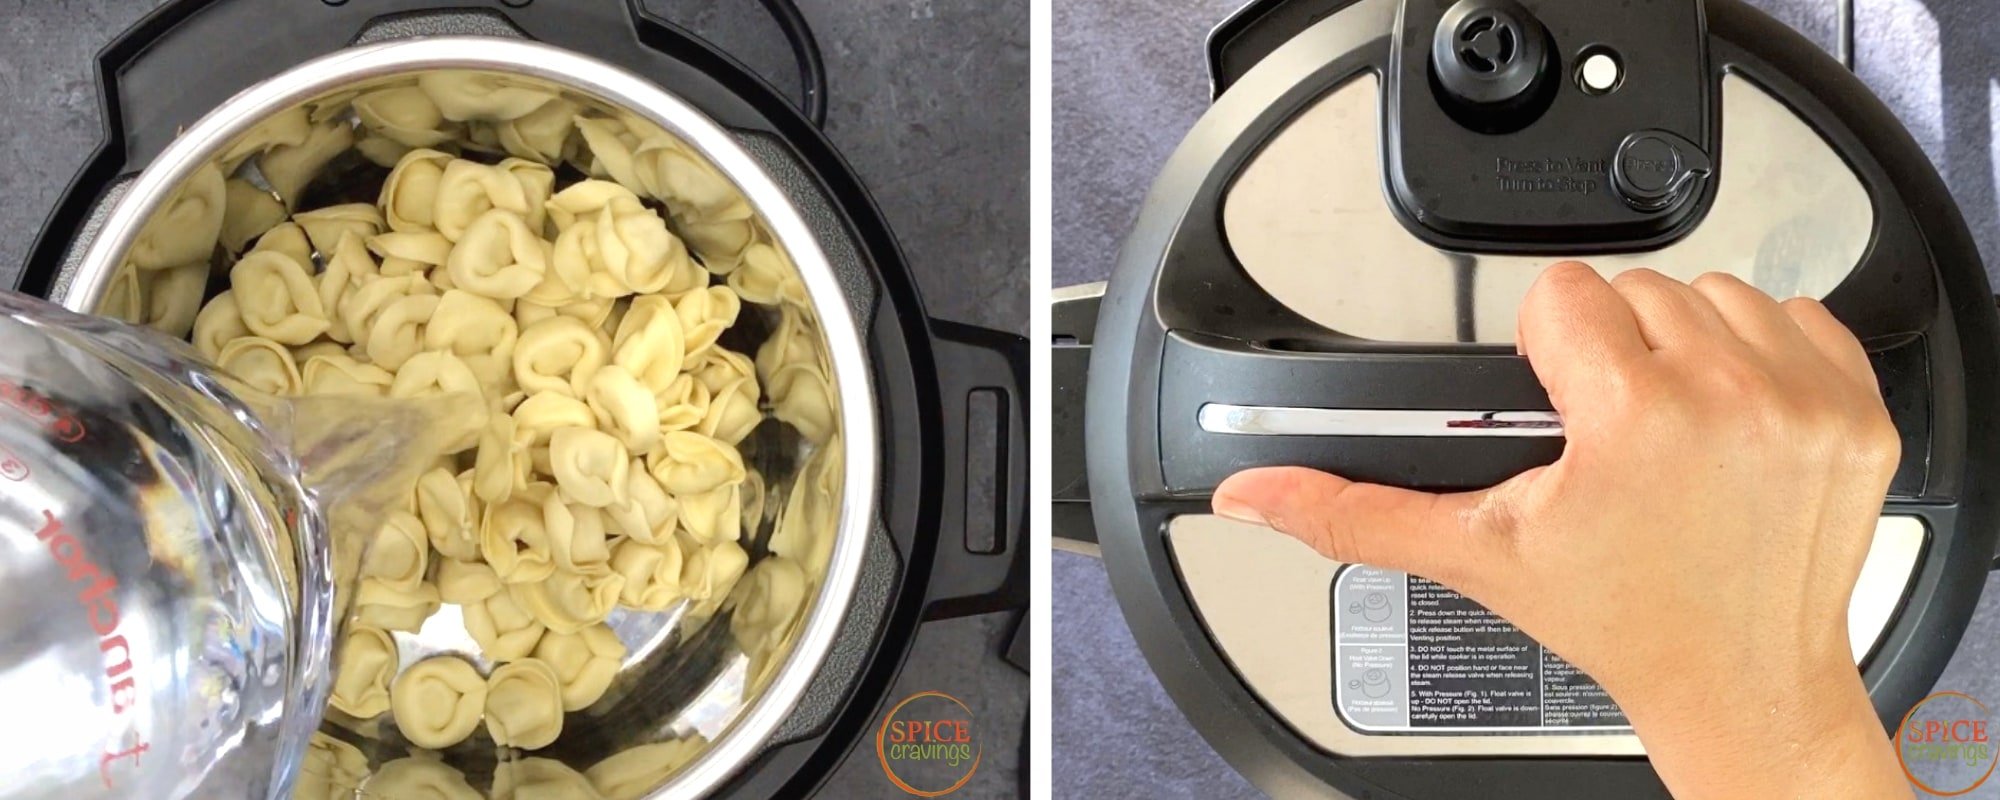 water pouring into instant pot bowl with tortellini, hand sealing instant pot